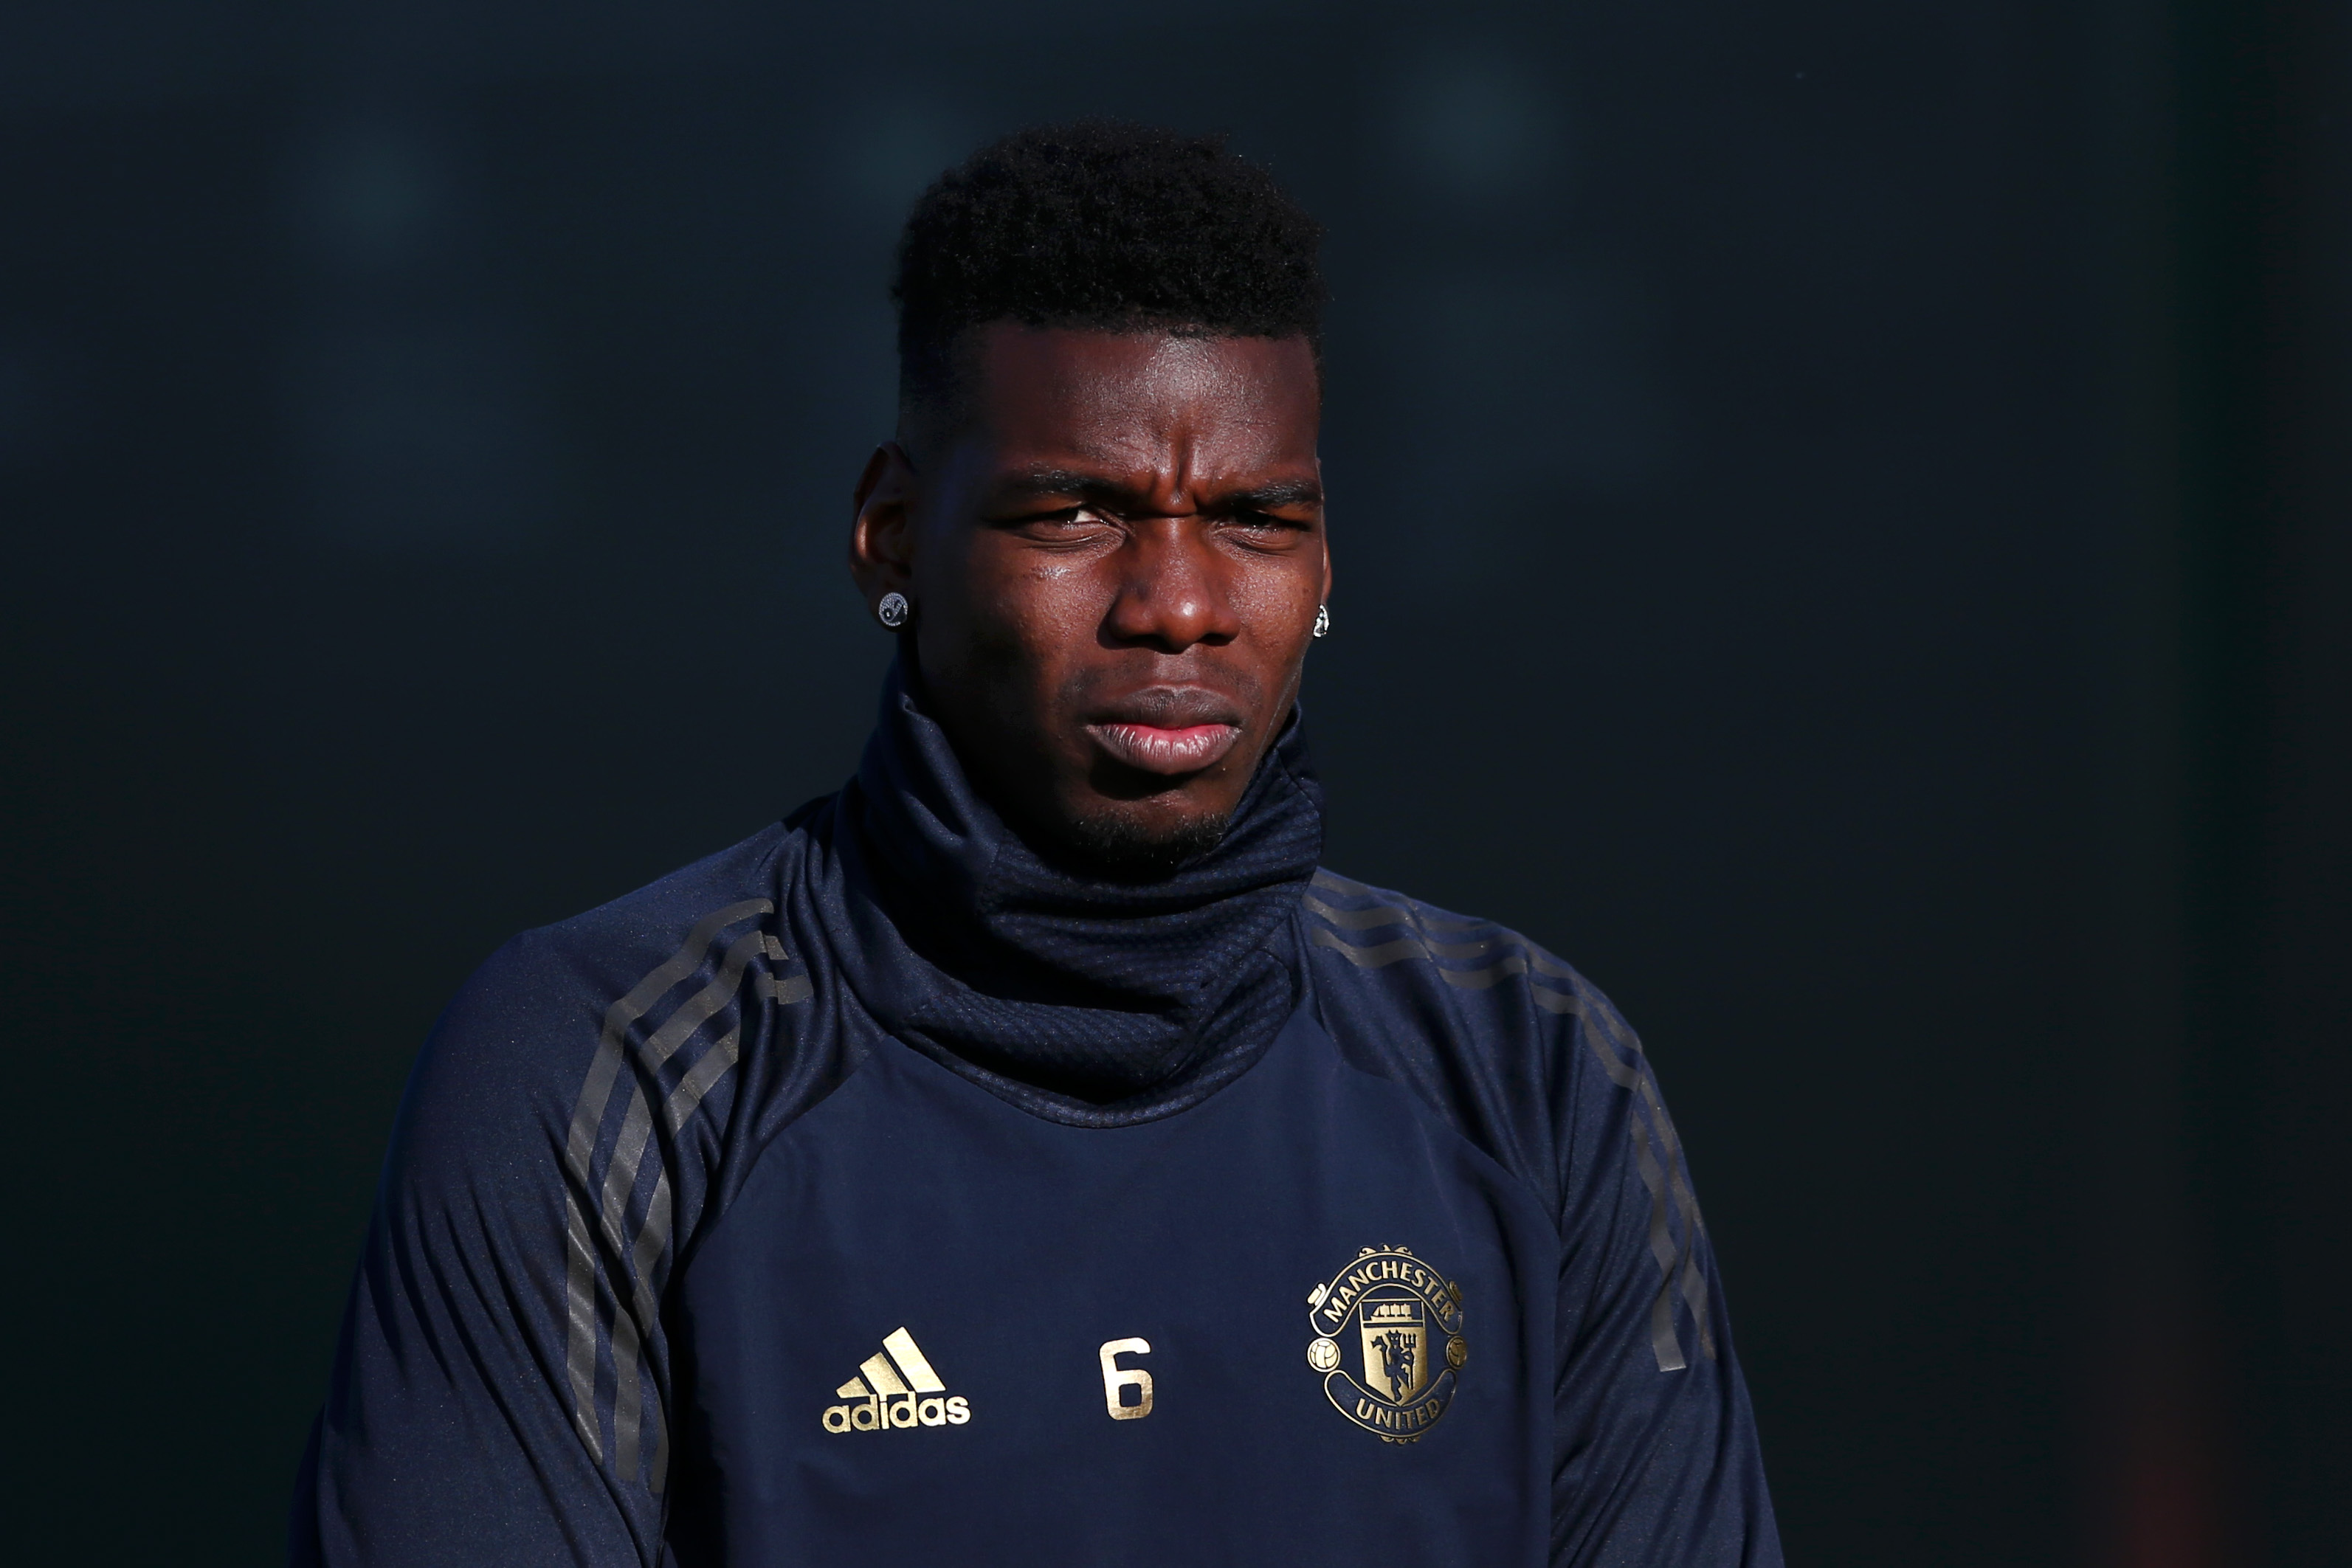 MANCHESTER, ENGLAND - FEBRUARY 11:  Paul Pogba of Manchester United arrives for a training session ahead of their UEFA Champions League Round of 16 match against Paris Saint-Germain F.C. at Aon Training Complex on February 11, 2019 in Manchester, England.  (Photo by Jan Kruger/Getty Images)